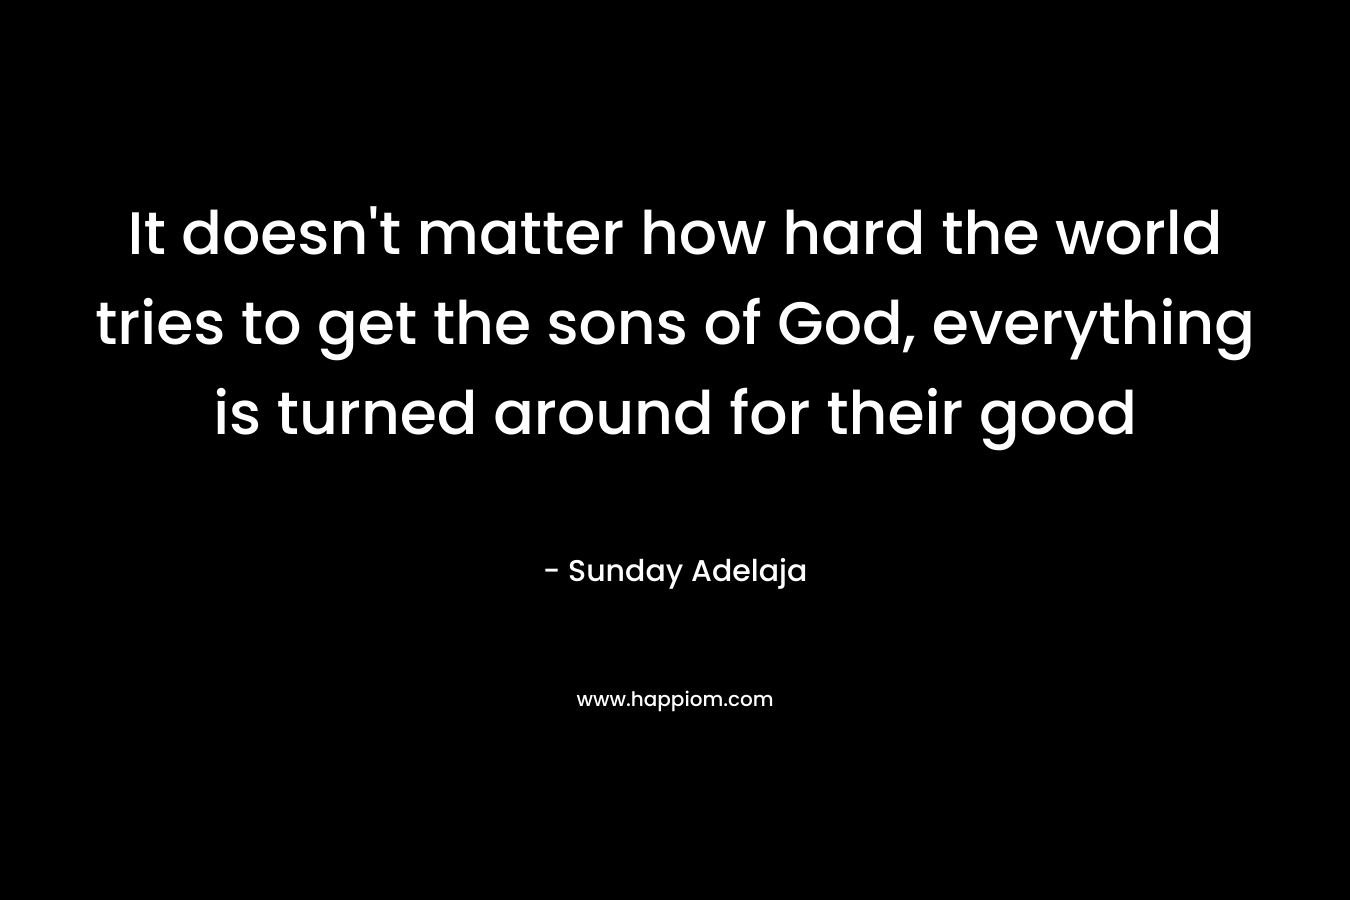 It doesn't matter how hard the world tries to get the sons of God, everything is turned around for their good